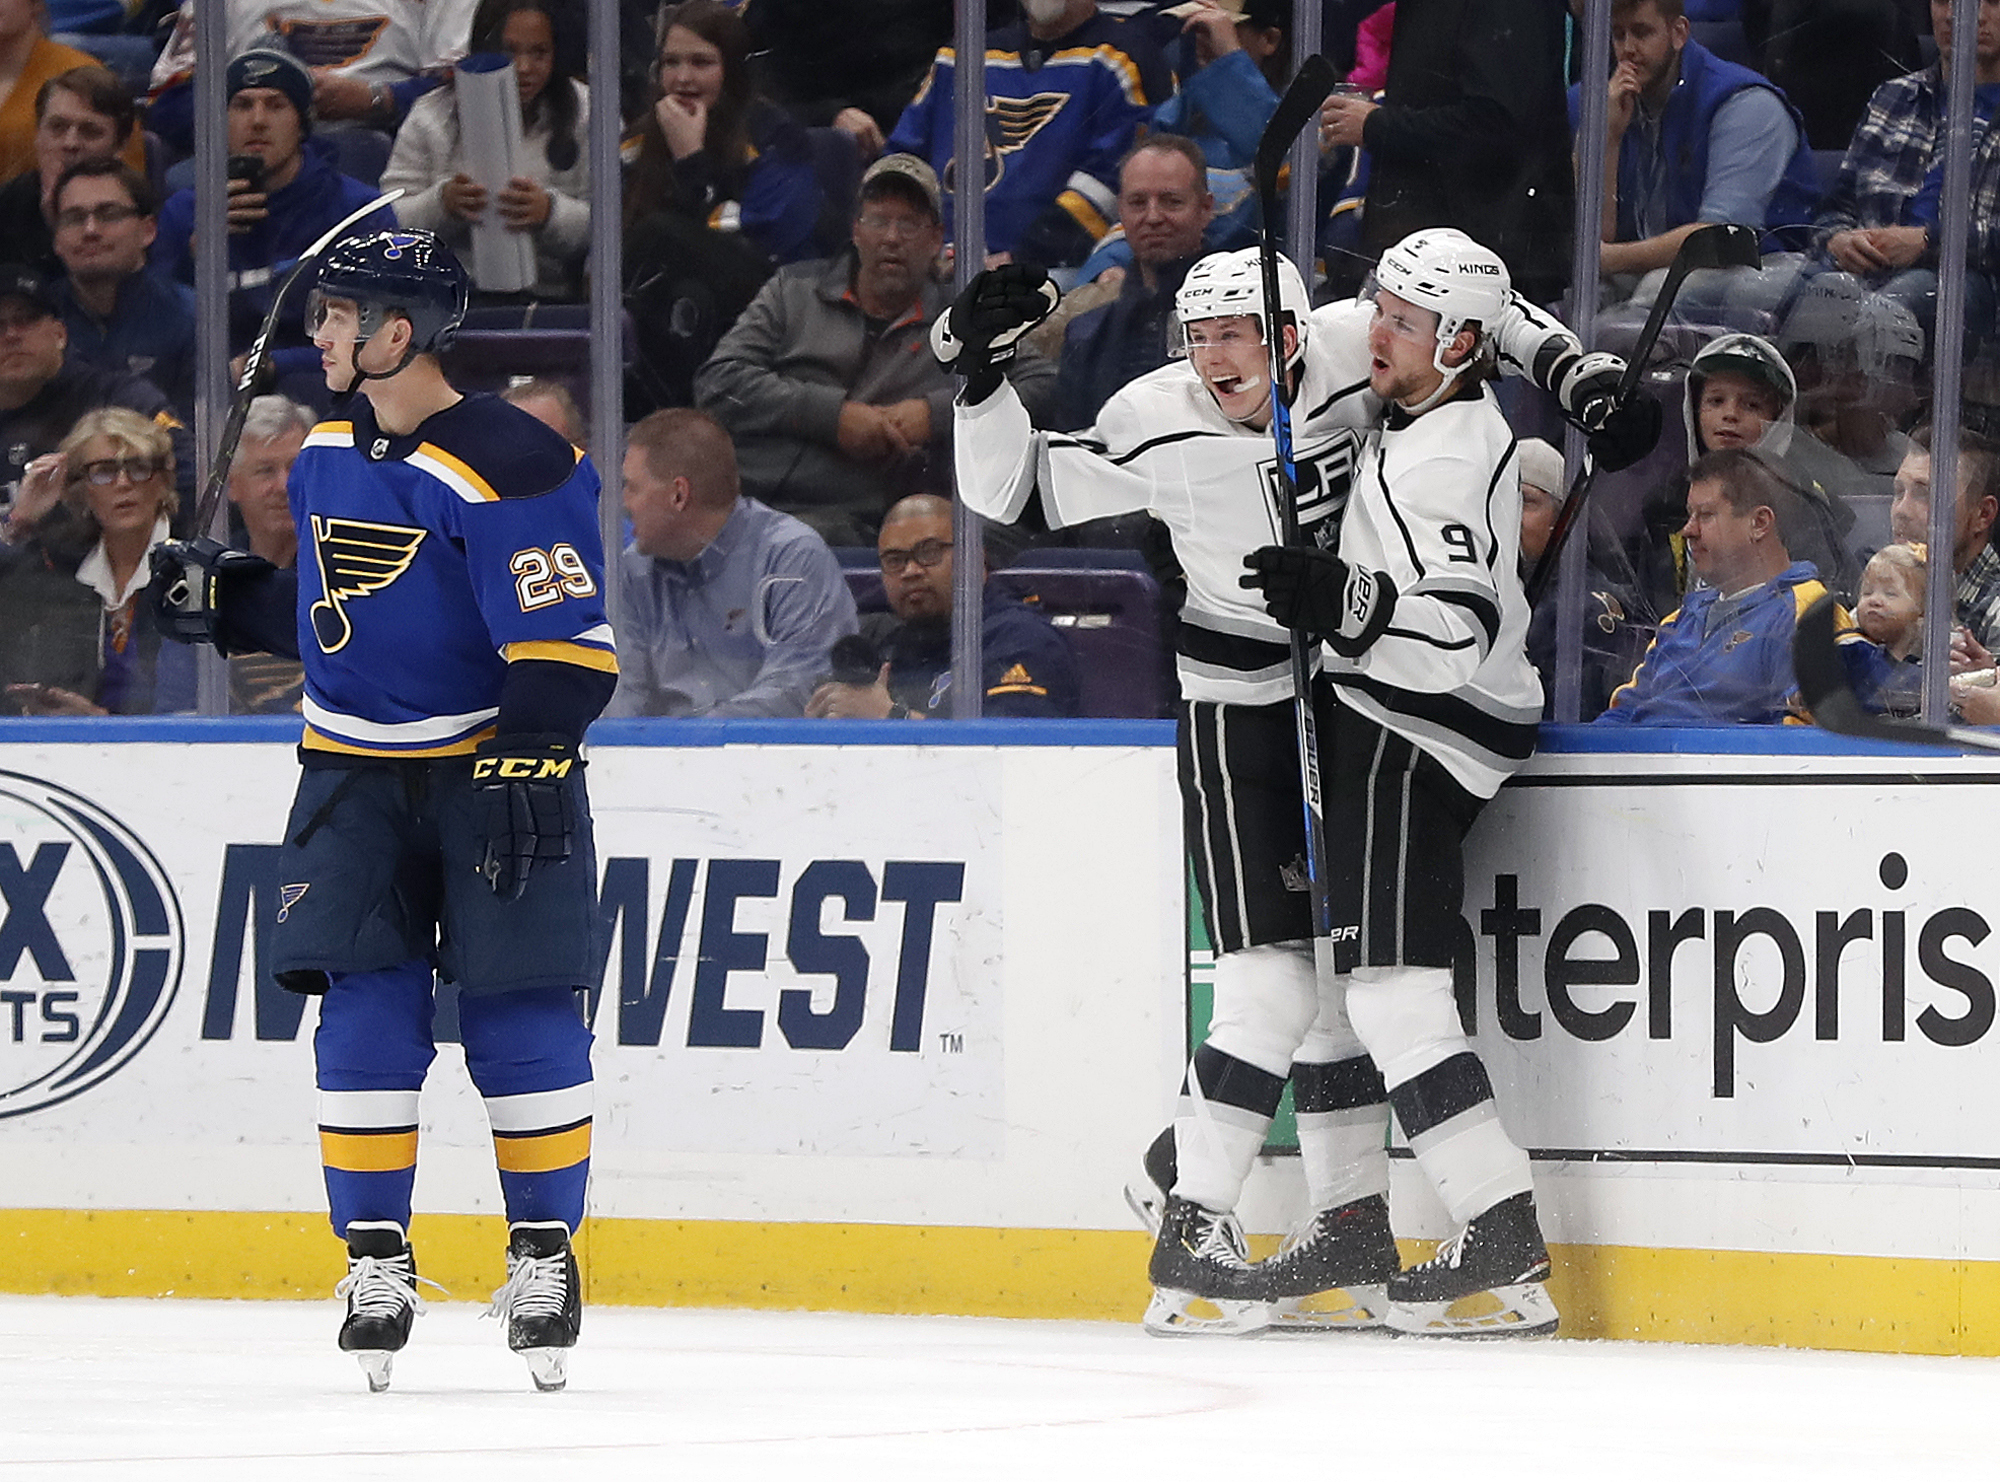 Peterson, Luff lead Kings to 2-0 win over Blues